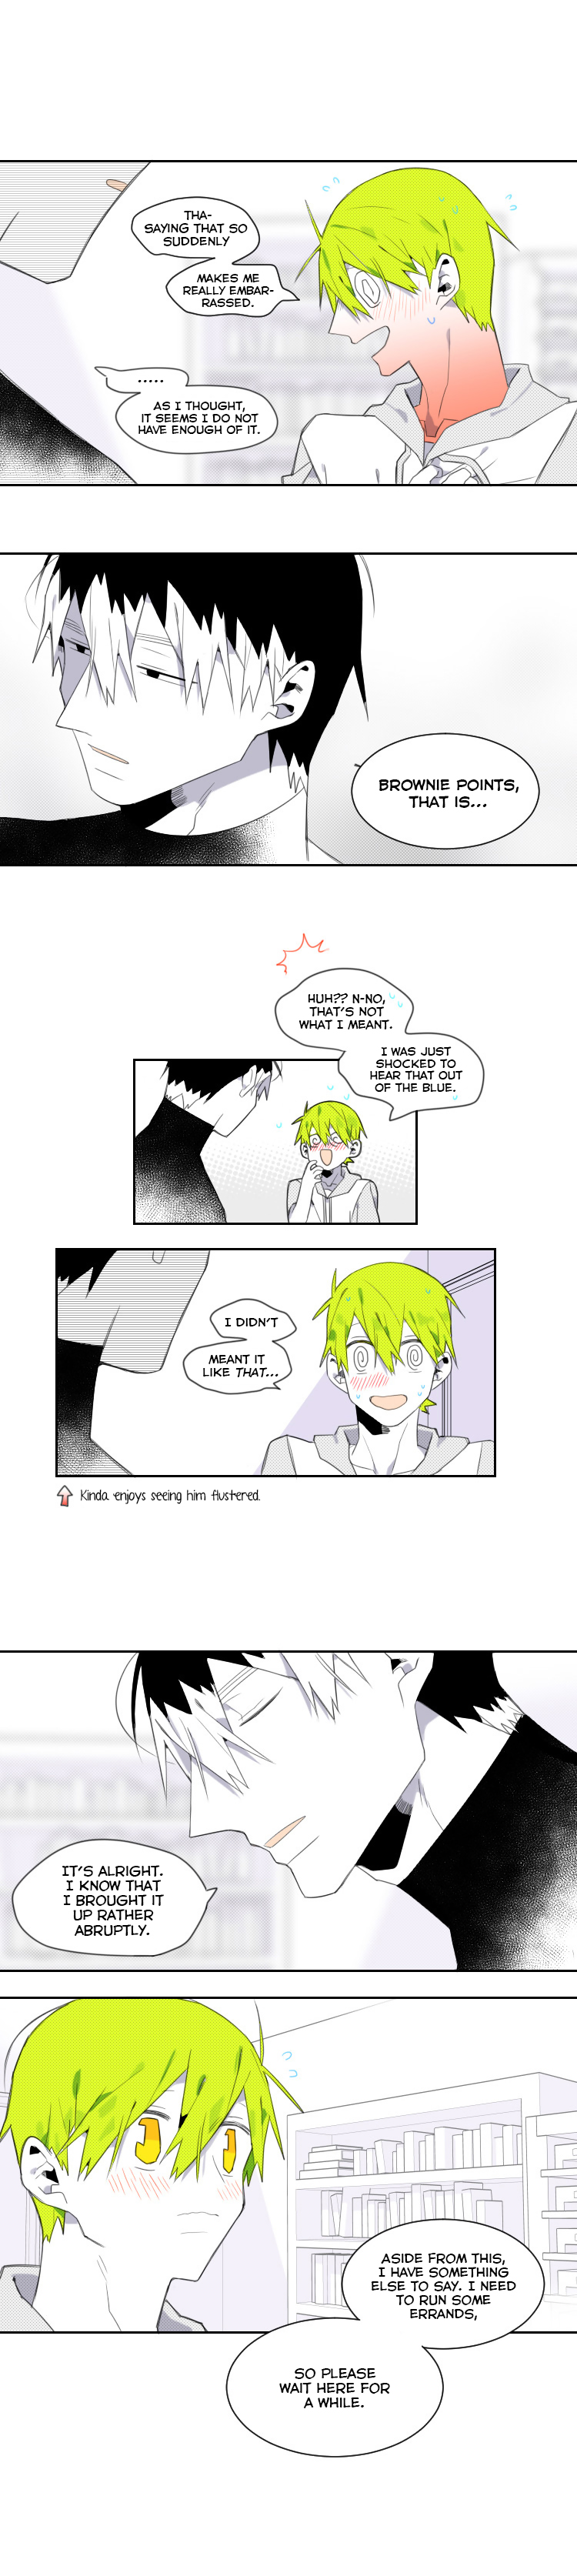 Hello, I'm Your Stalker - Page 2